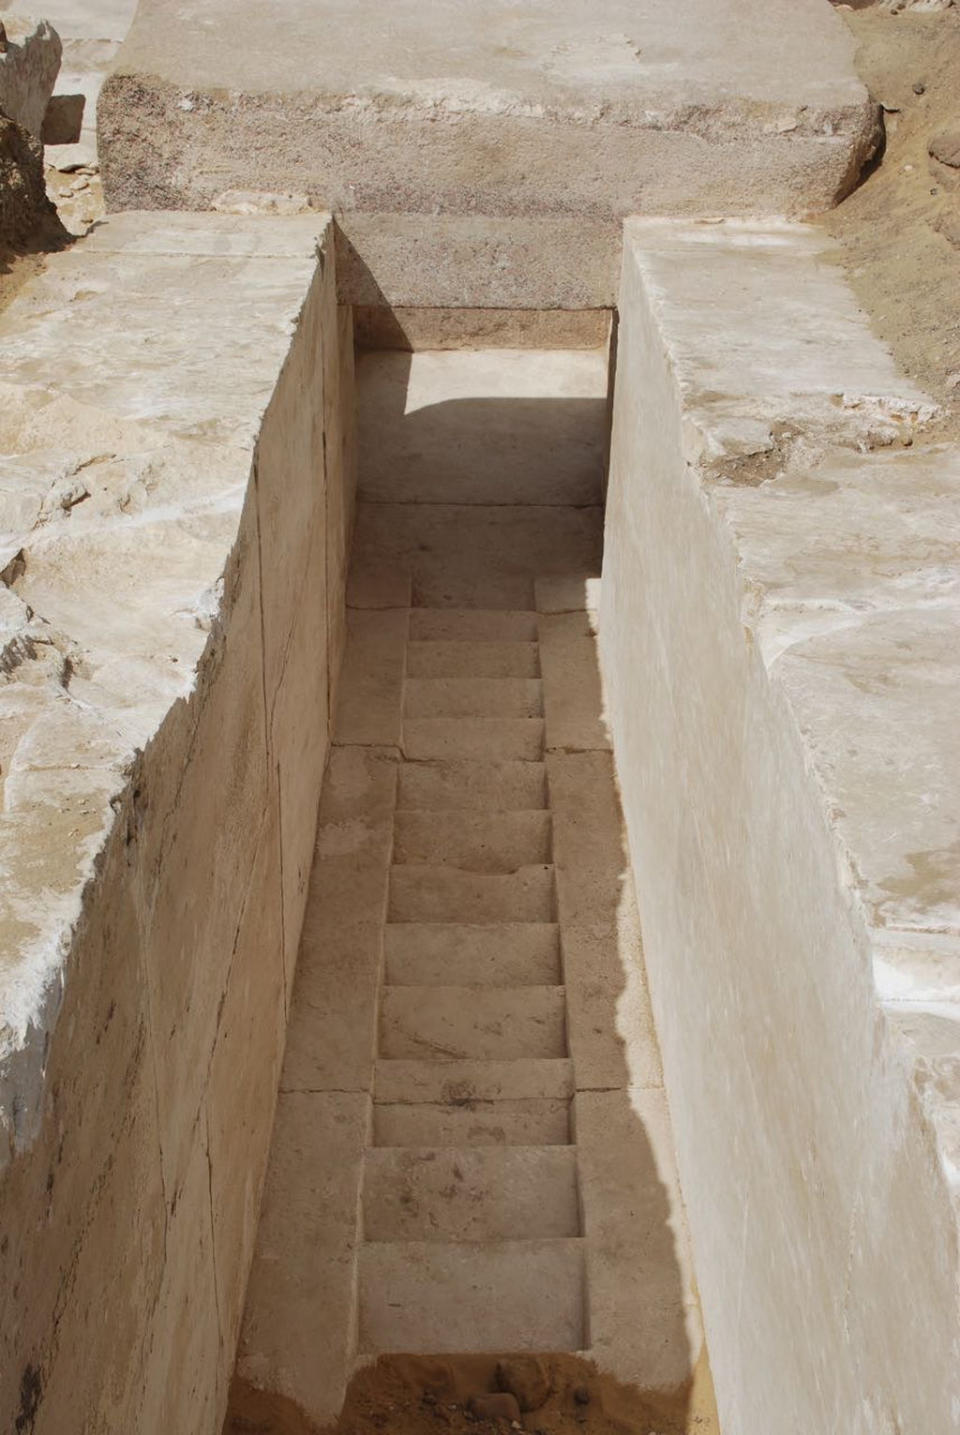 Within the remains of the pyramid, archaeologists found a corridor with steps. <cite>Egyptian Ministry of Antiquities</cite>